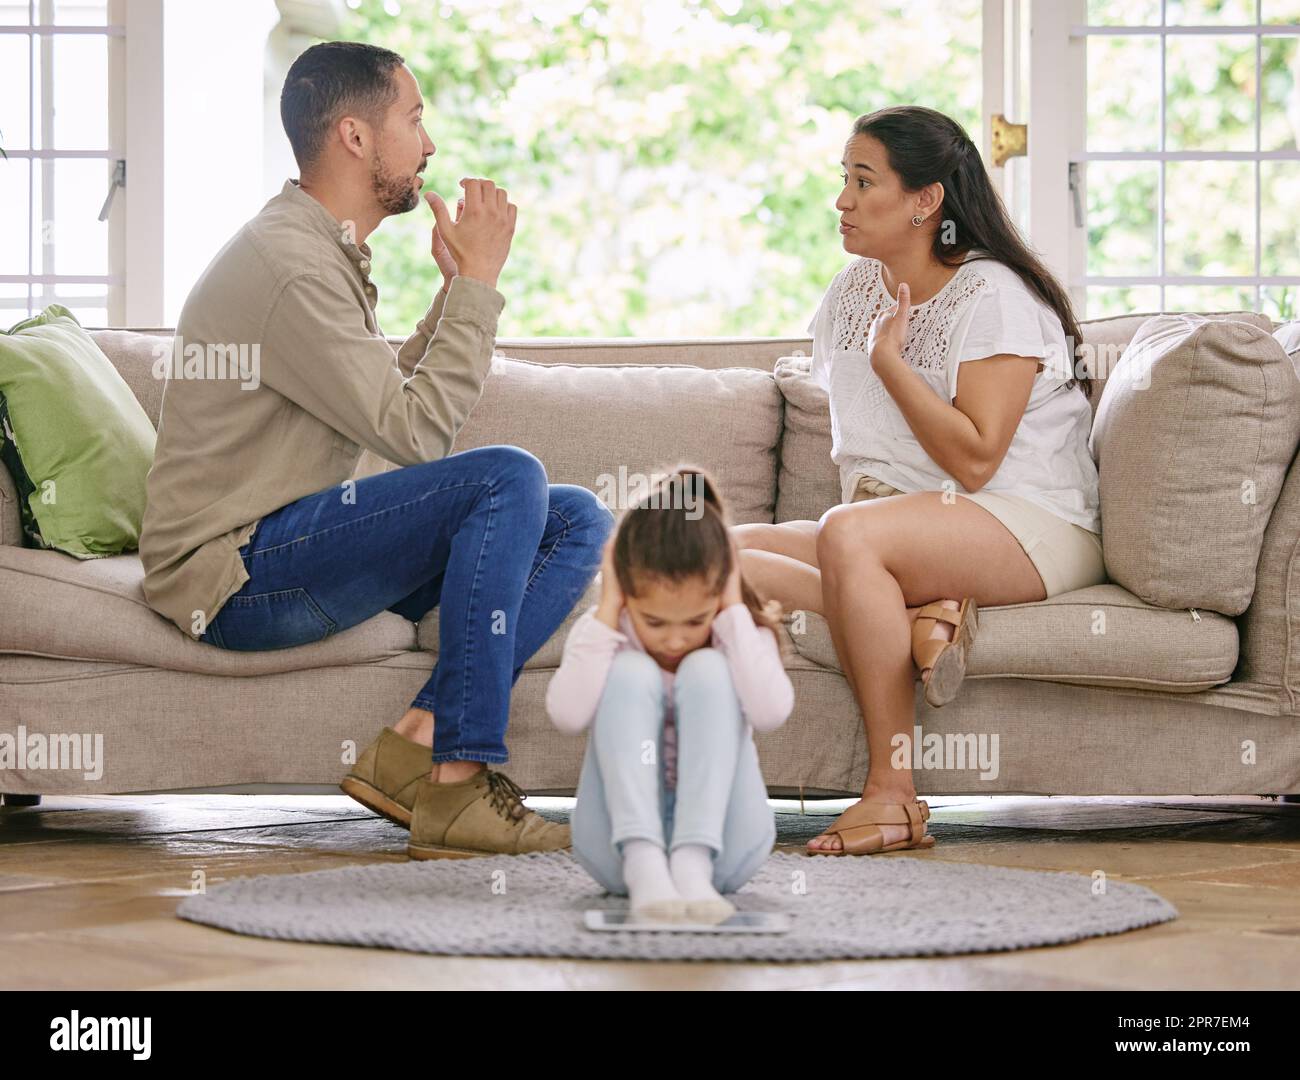 She cant listen any longer. Shot of a little girl covering her ears while her parents argue at home. Stock Photo